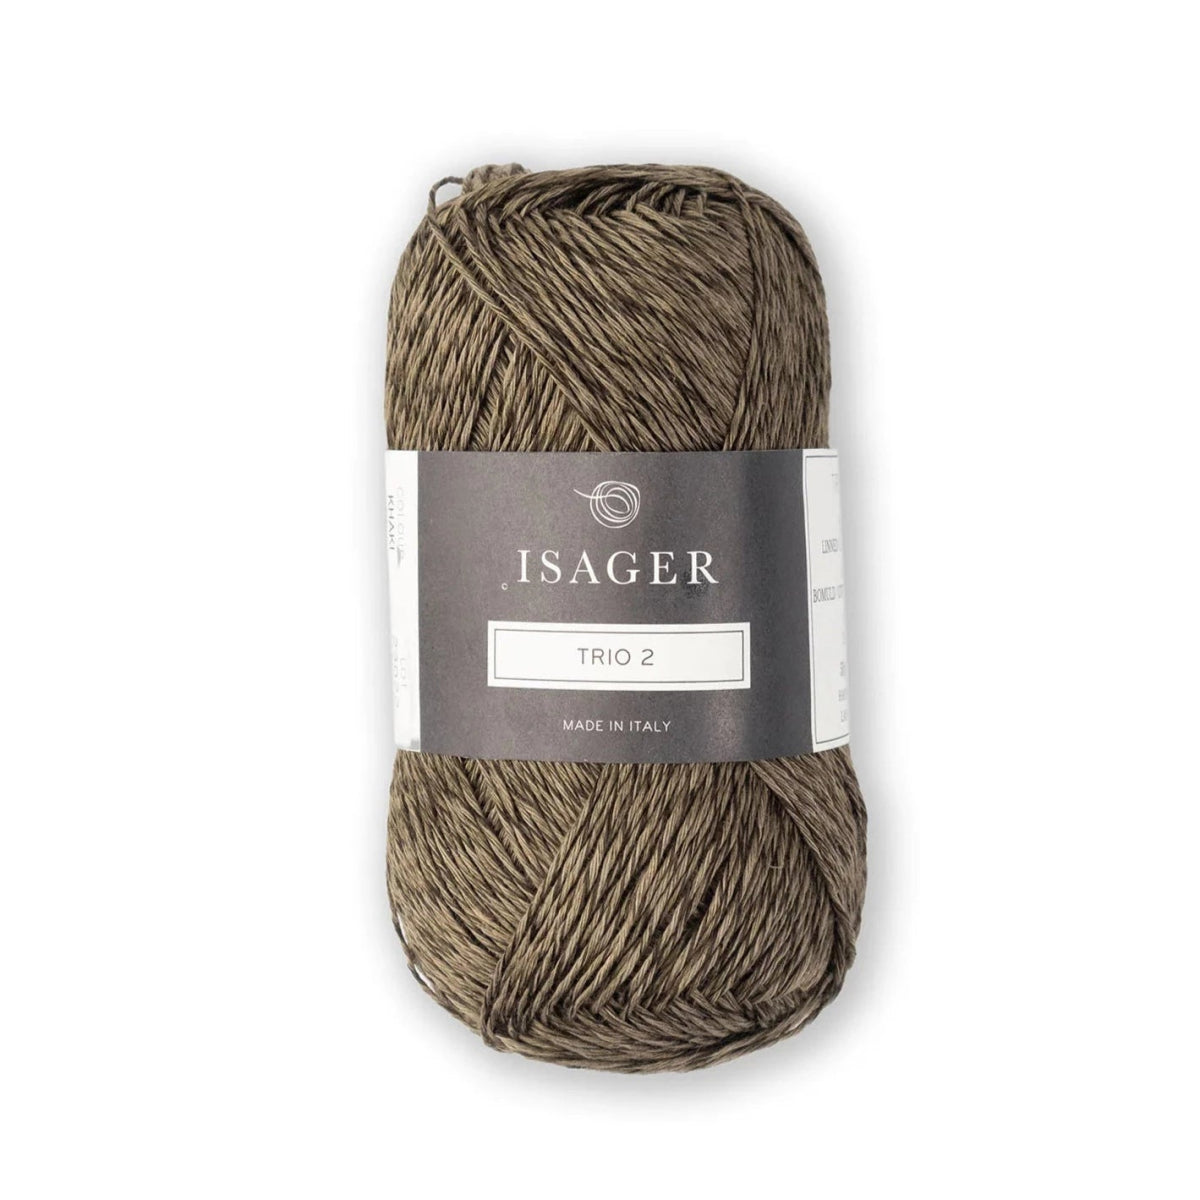 Isager Trio 2 - Khaki - 5 Ply - Cotton - The Little Yarn Store